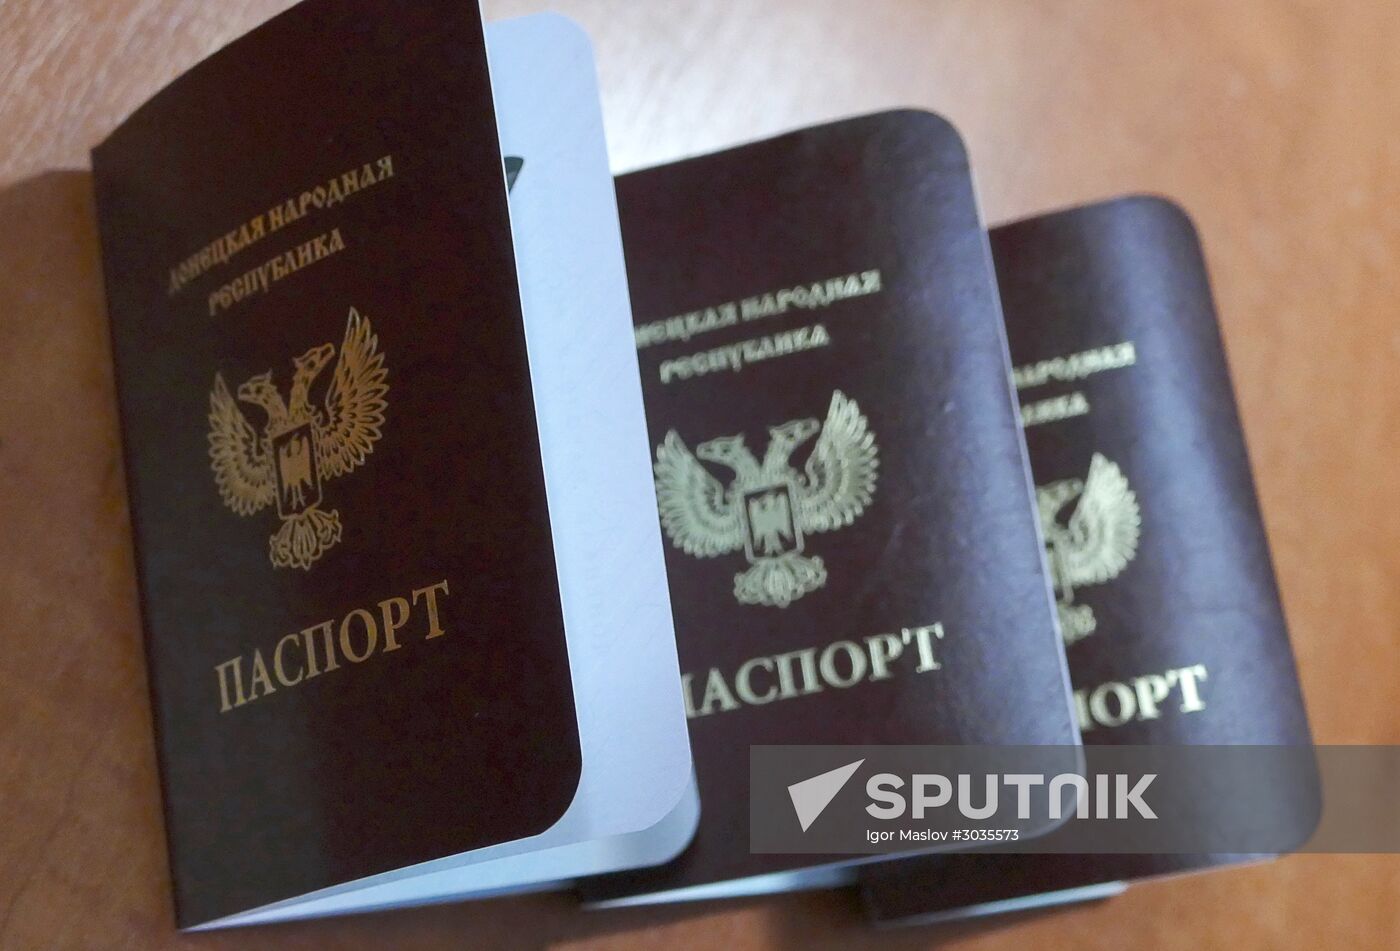 DPR passports are issued